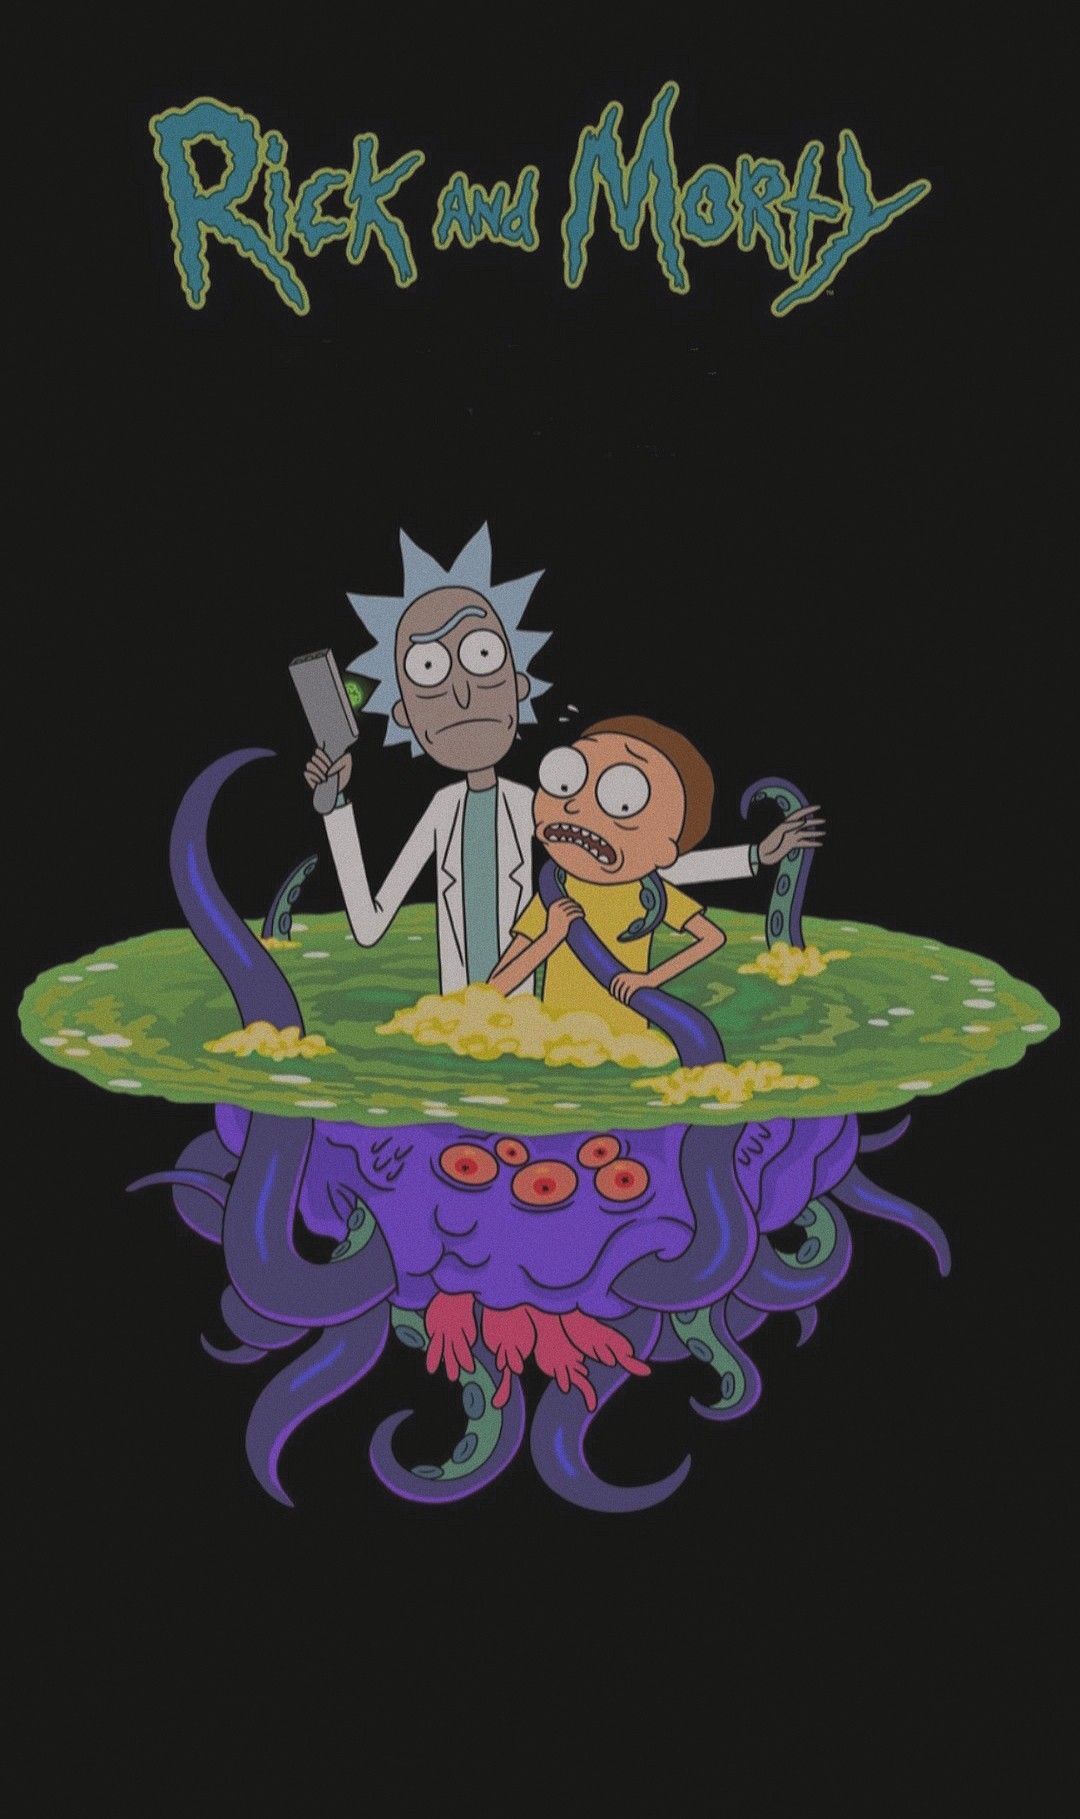 Rick and Morty. iPhone wallpaper rick and morty, Rick and morty poster, Rick and morty drawing